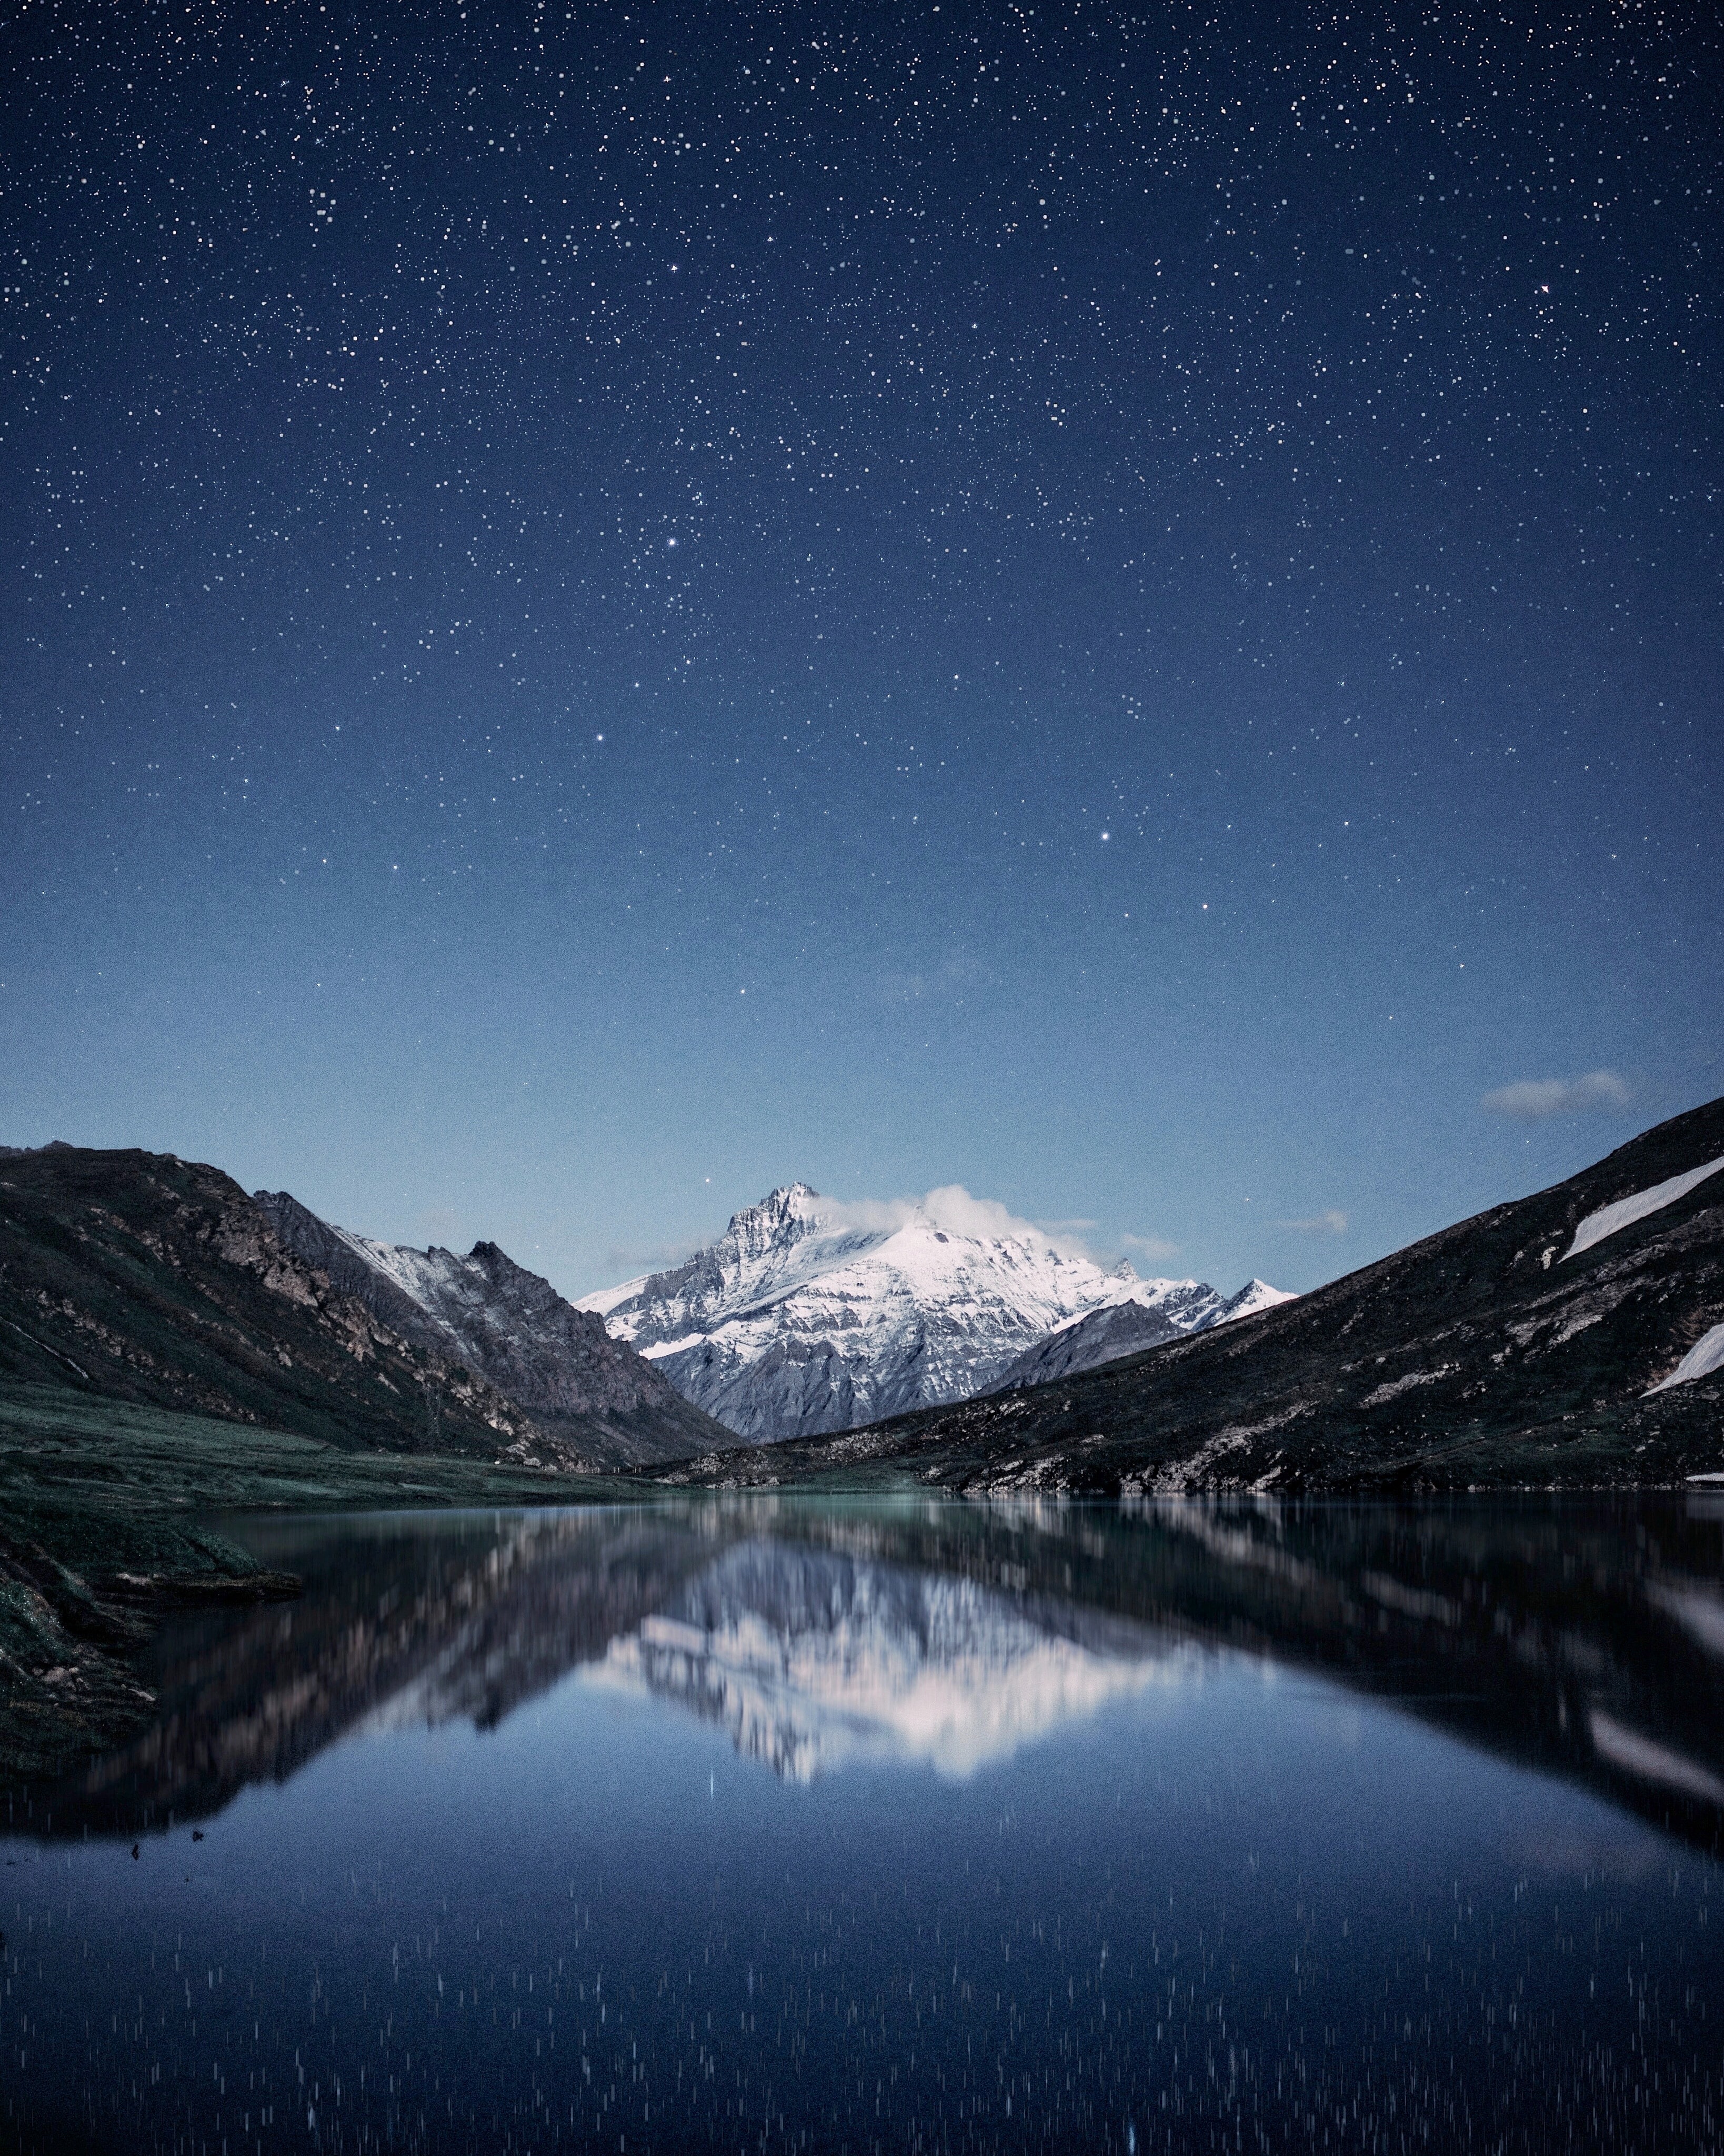 desktop Images snowbound, snow covered, nature, mountains, night, reflection, starry sky